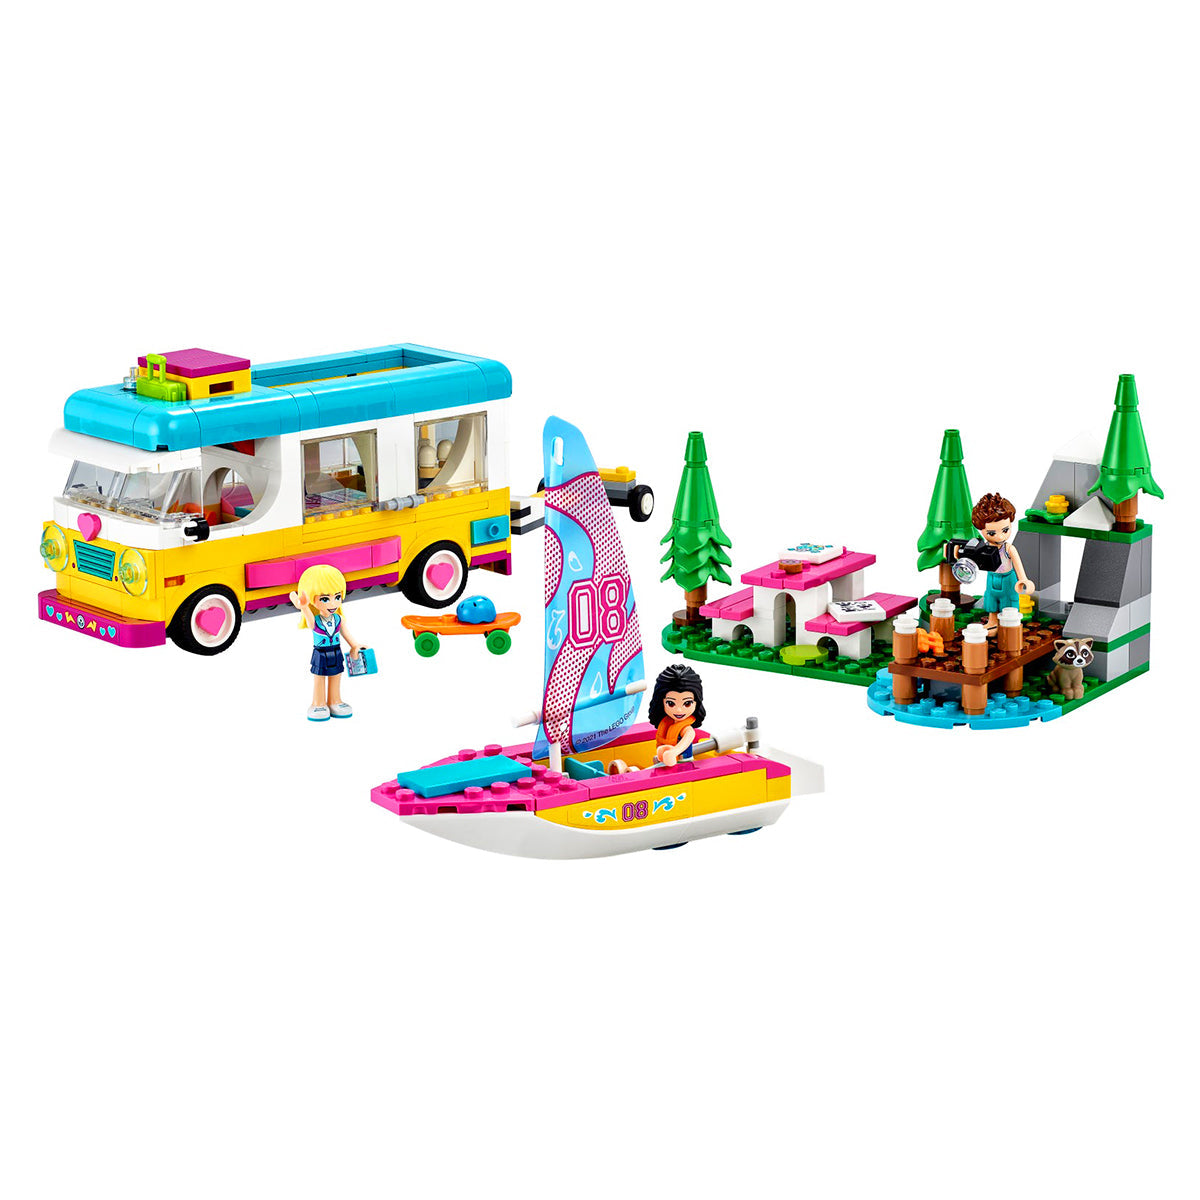 LEGO Friends - Forest Camper Van and Sailboat 41681